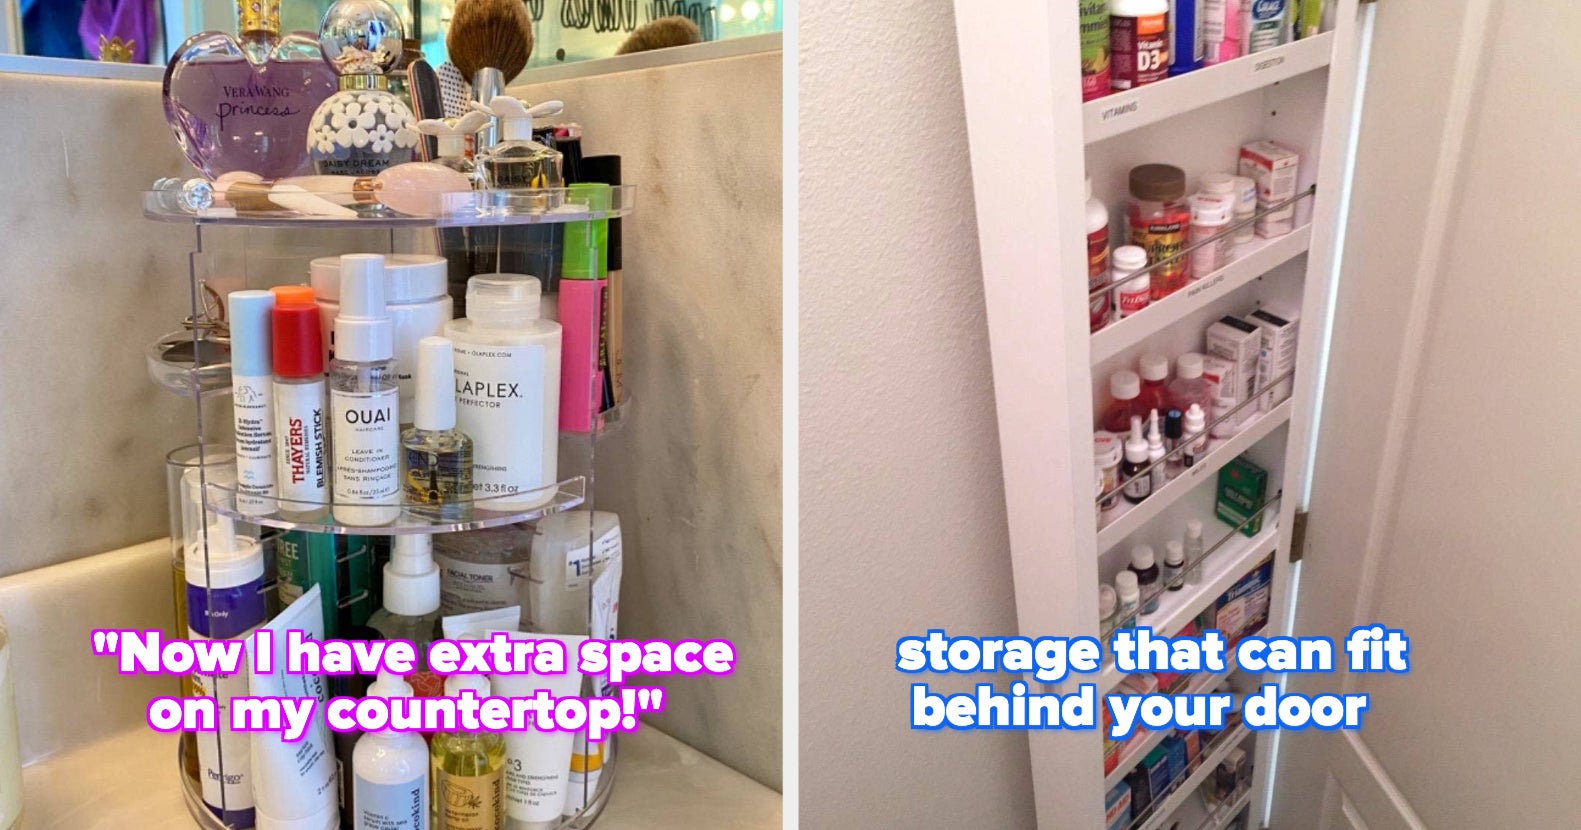 25 Bathroom Storage Products For Small Spaces